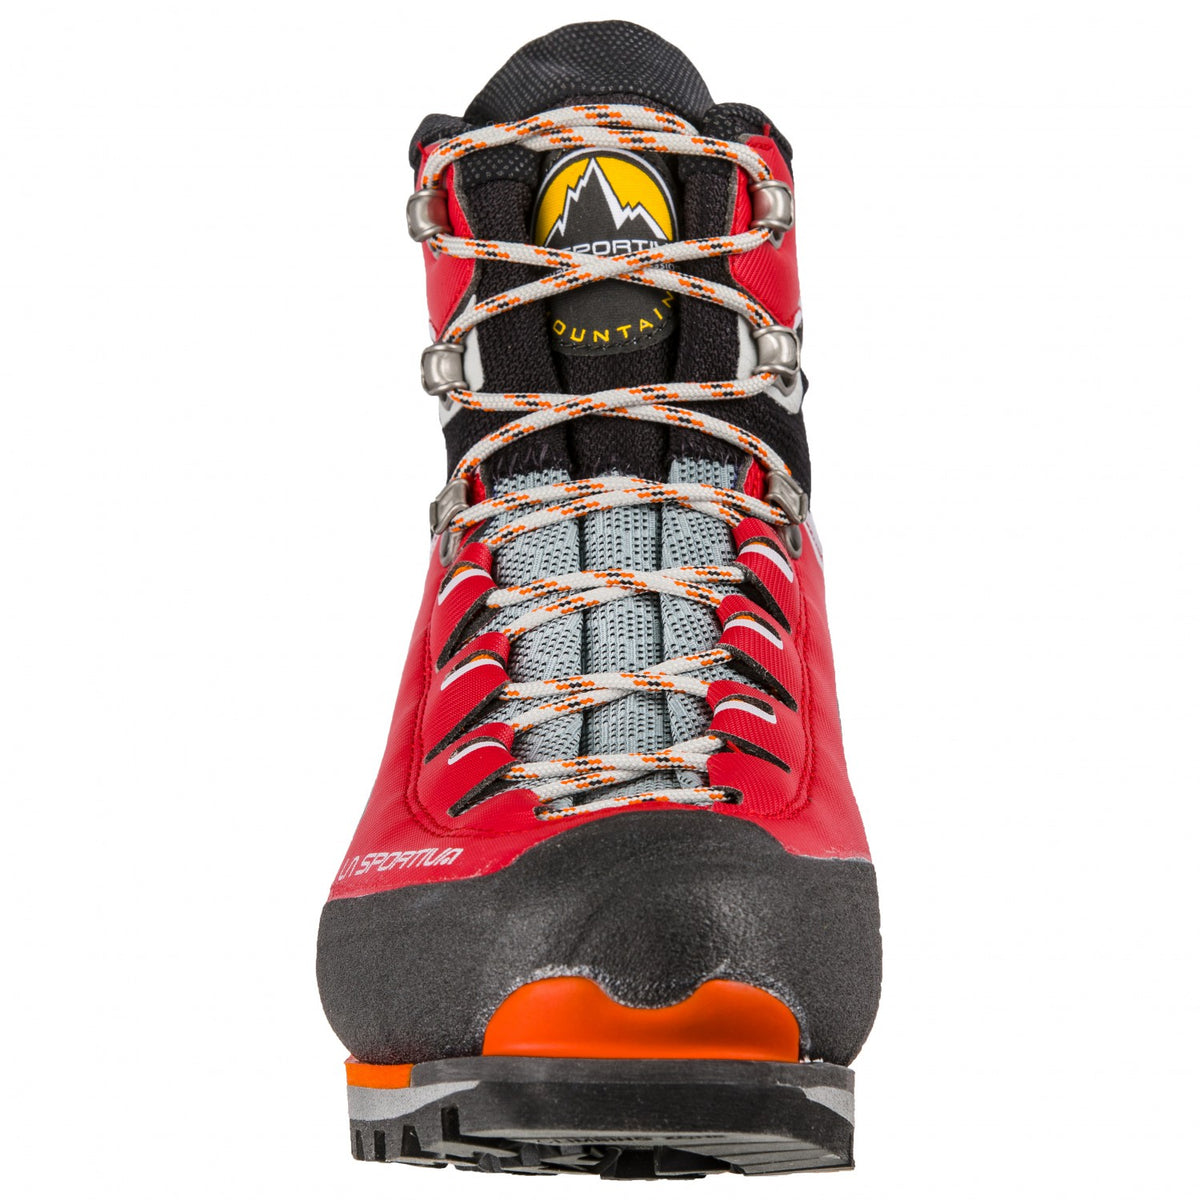 La Sportiva Trango Tower Extreme GTX Womens mountaineering boot, front view showing laces